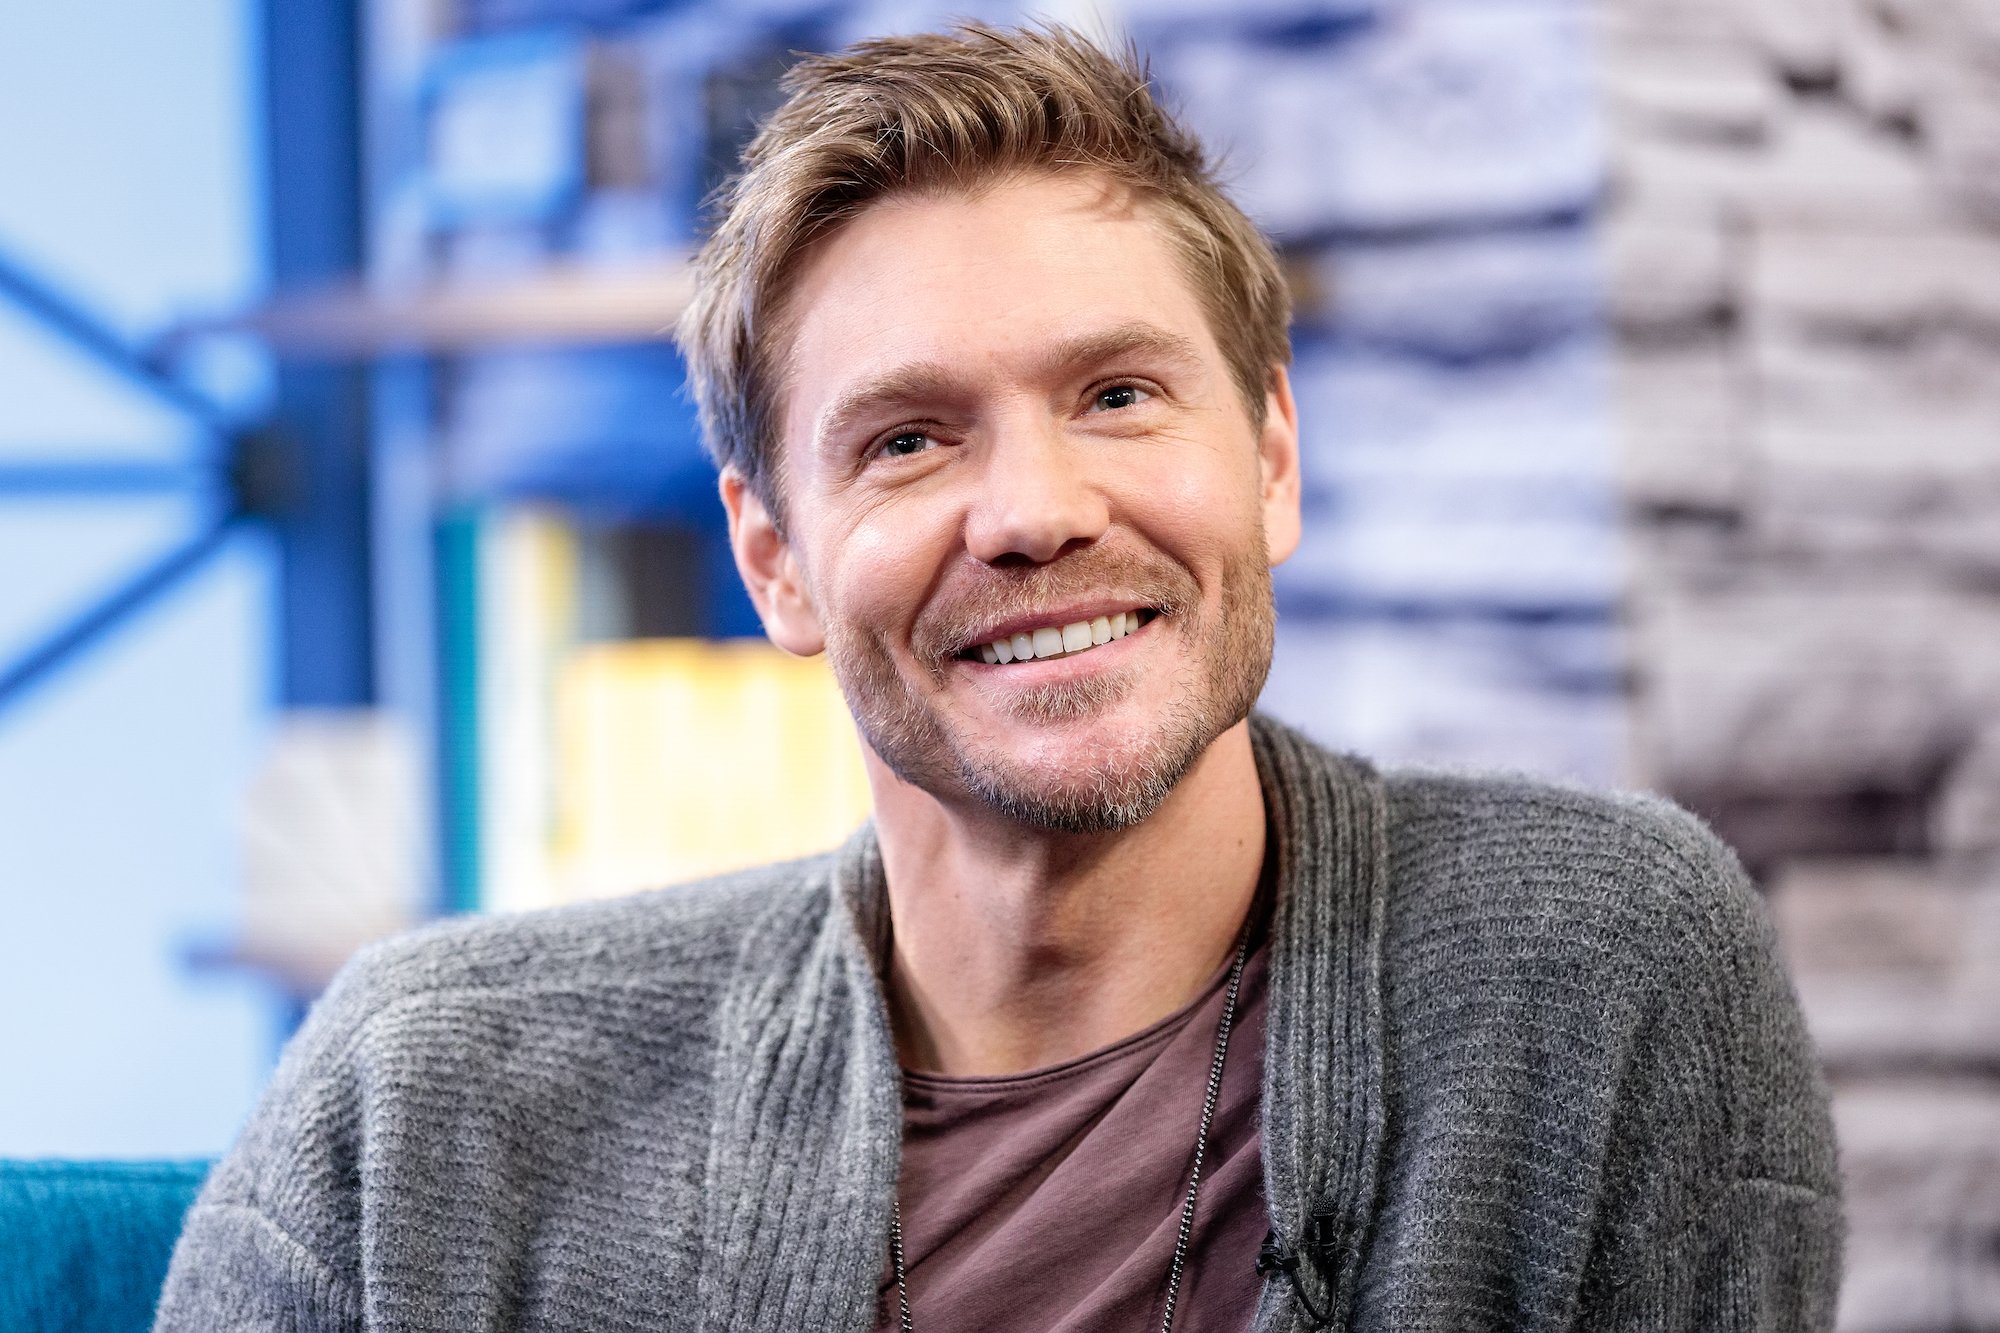 'One Tree Hill' star Chad Michael Murray wearing a gray sweater.